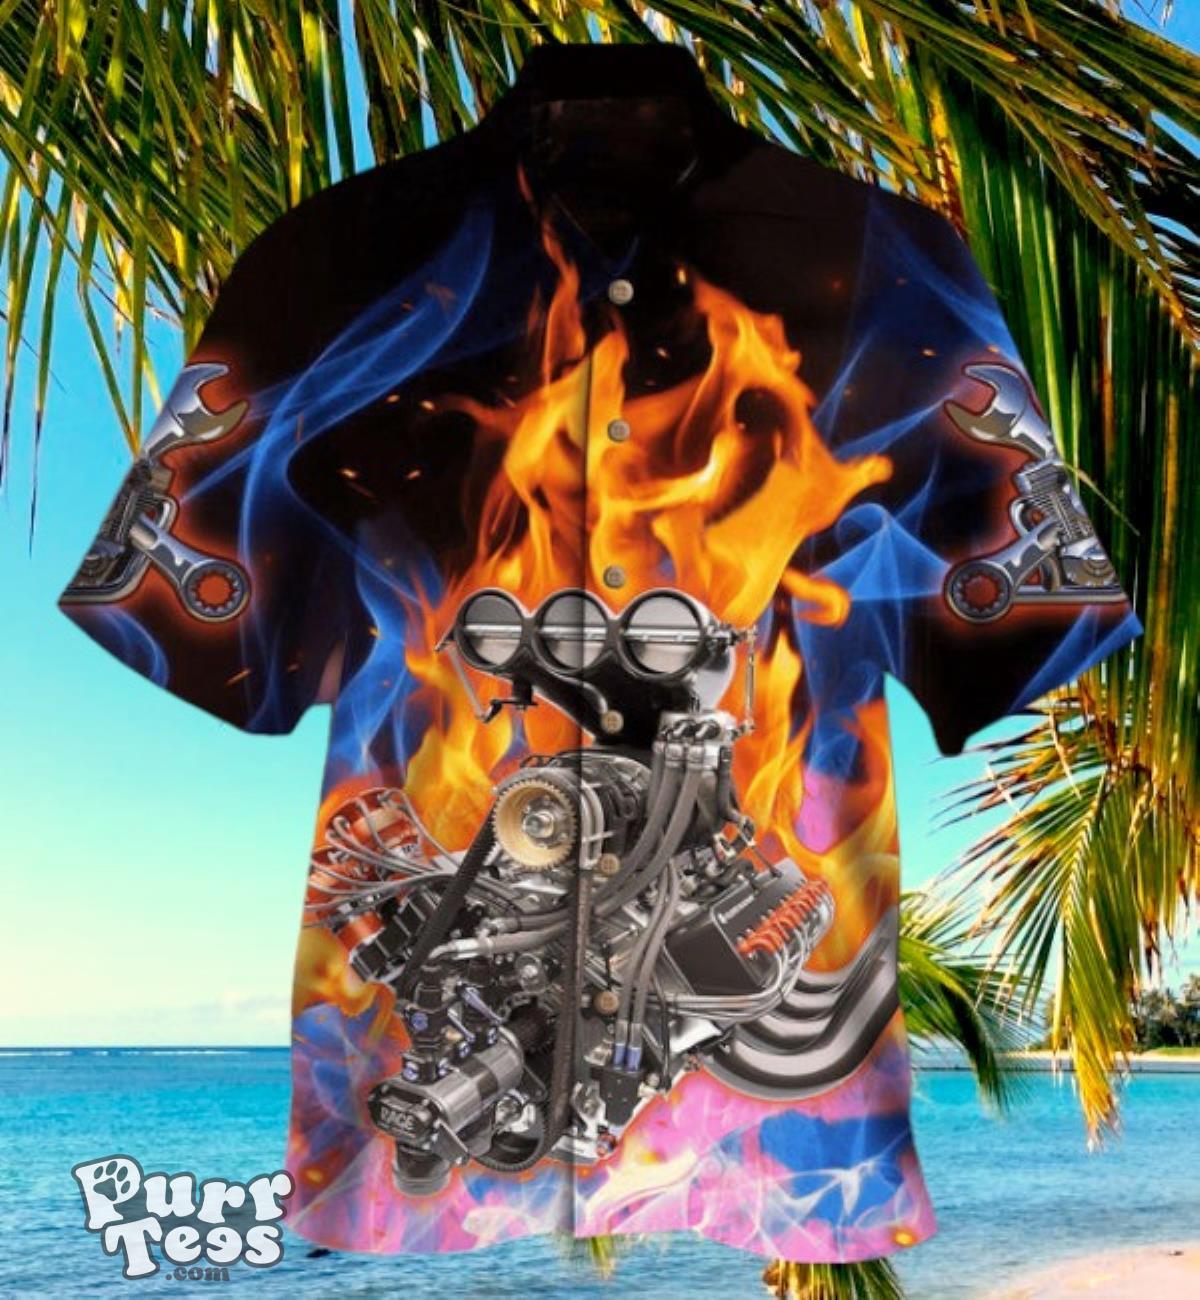 Hot Rod Limited Edition Hawaiian Shirt Unique Gift Product Photo 1